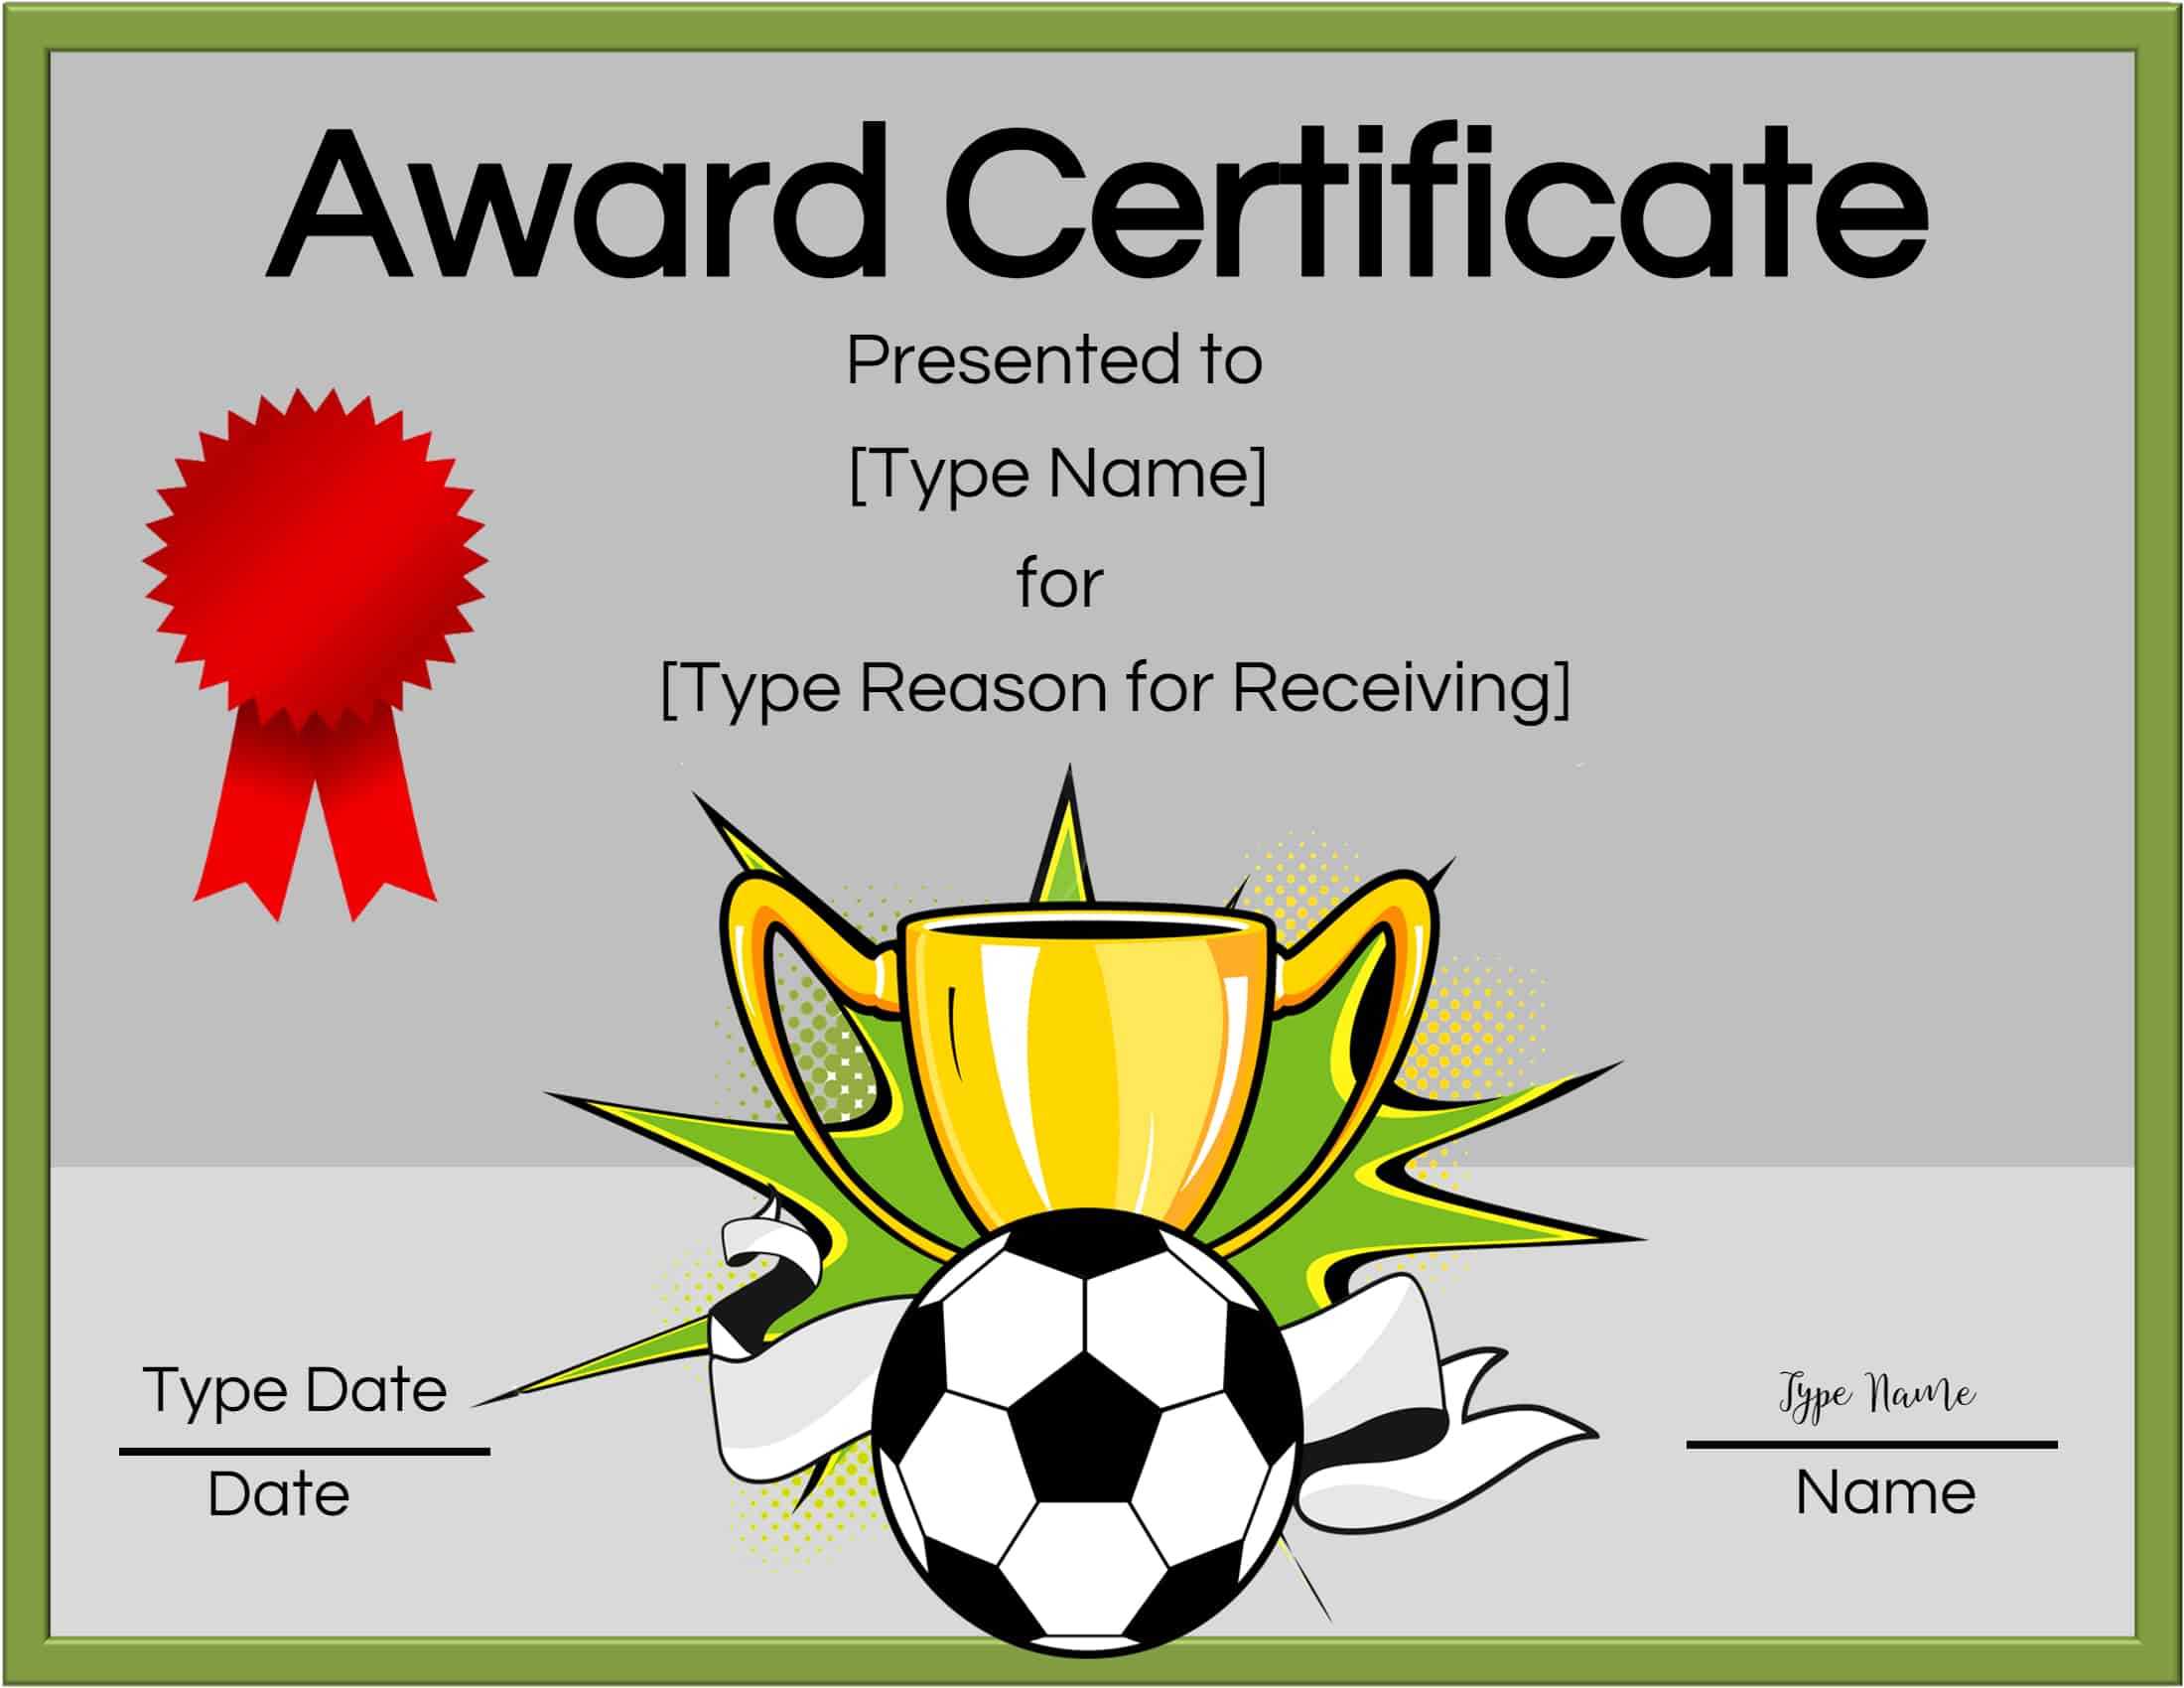 Free Soccer Certificate Maker | Edit Online And Print At Home For Soccer Certificate Template